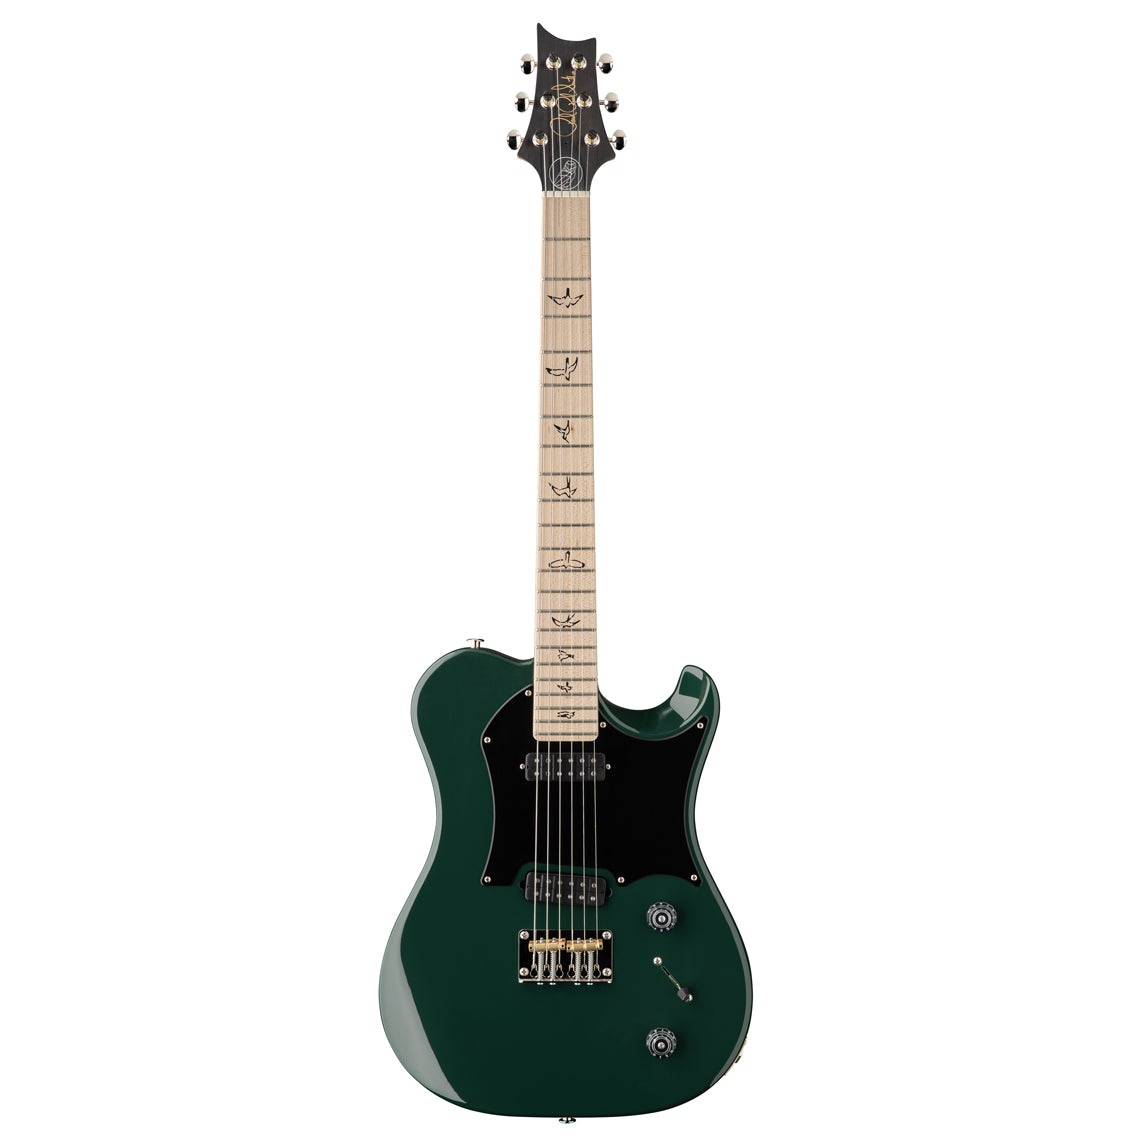 Paul Reed Smith (PRS) Myles Kennedy Signature Hunters Green